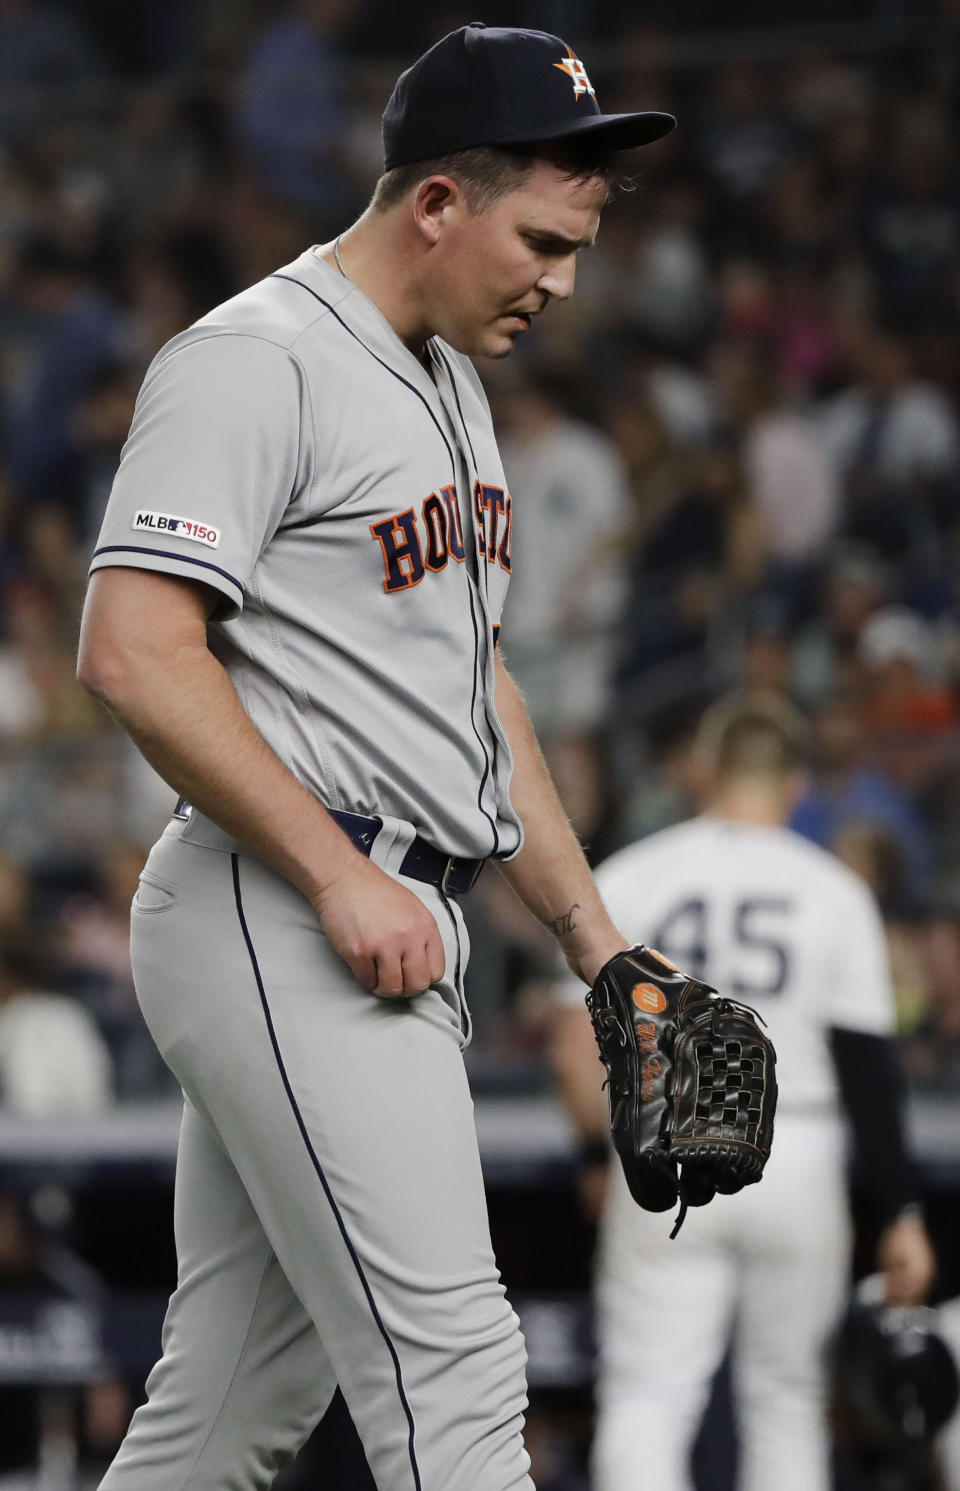 Houston Astros relief pitcher Will Harris leaves the field after the sixth inning of the team's baseball game against the New York Yankees on Saturday, June 22, 2019, in New York. (AP Photo/Frank Franklin II)